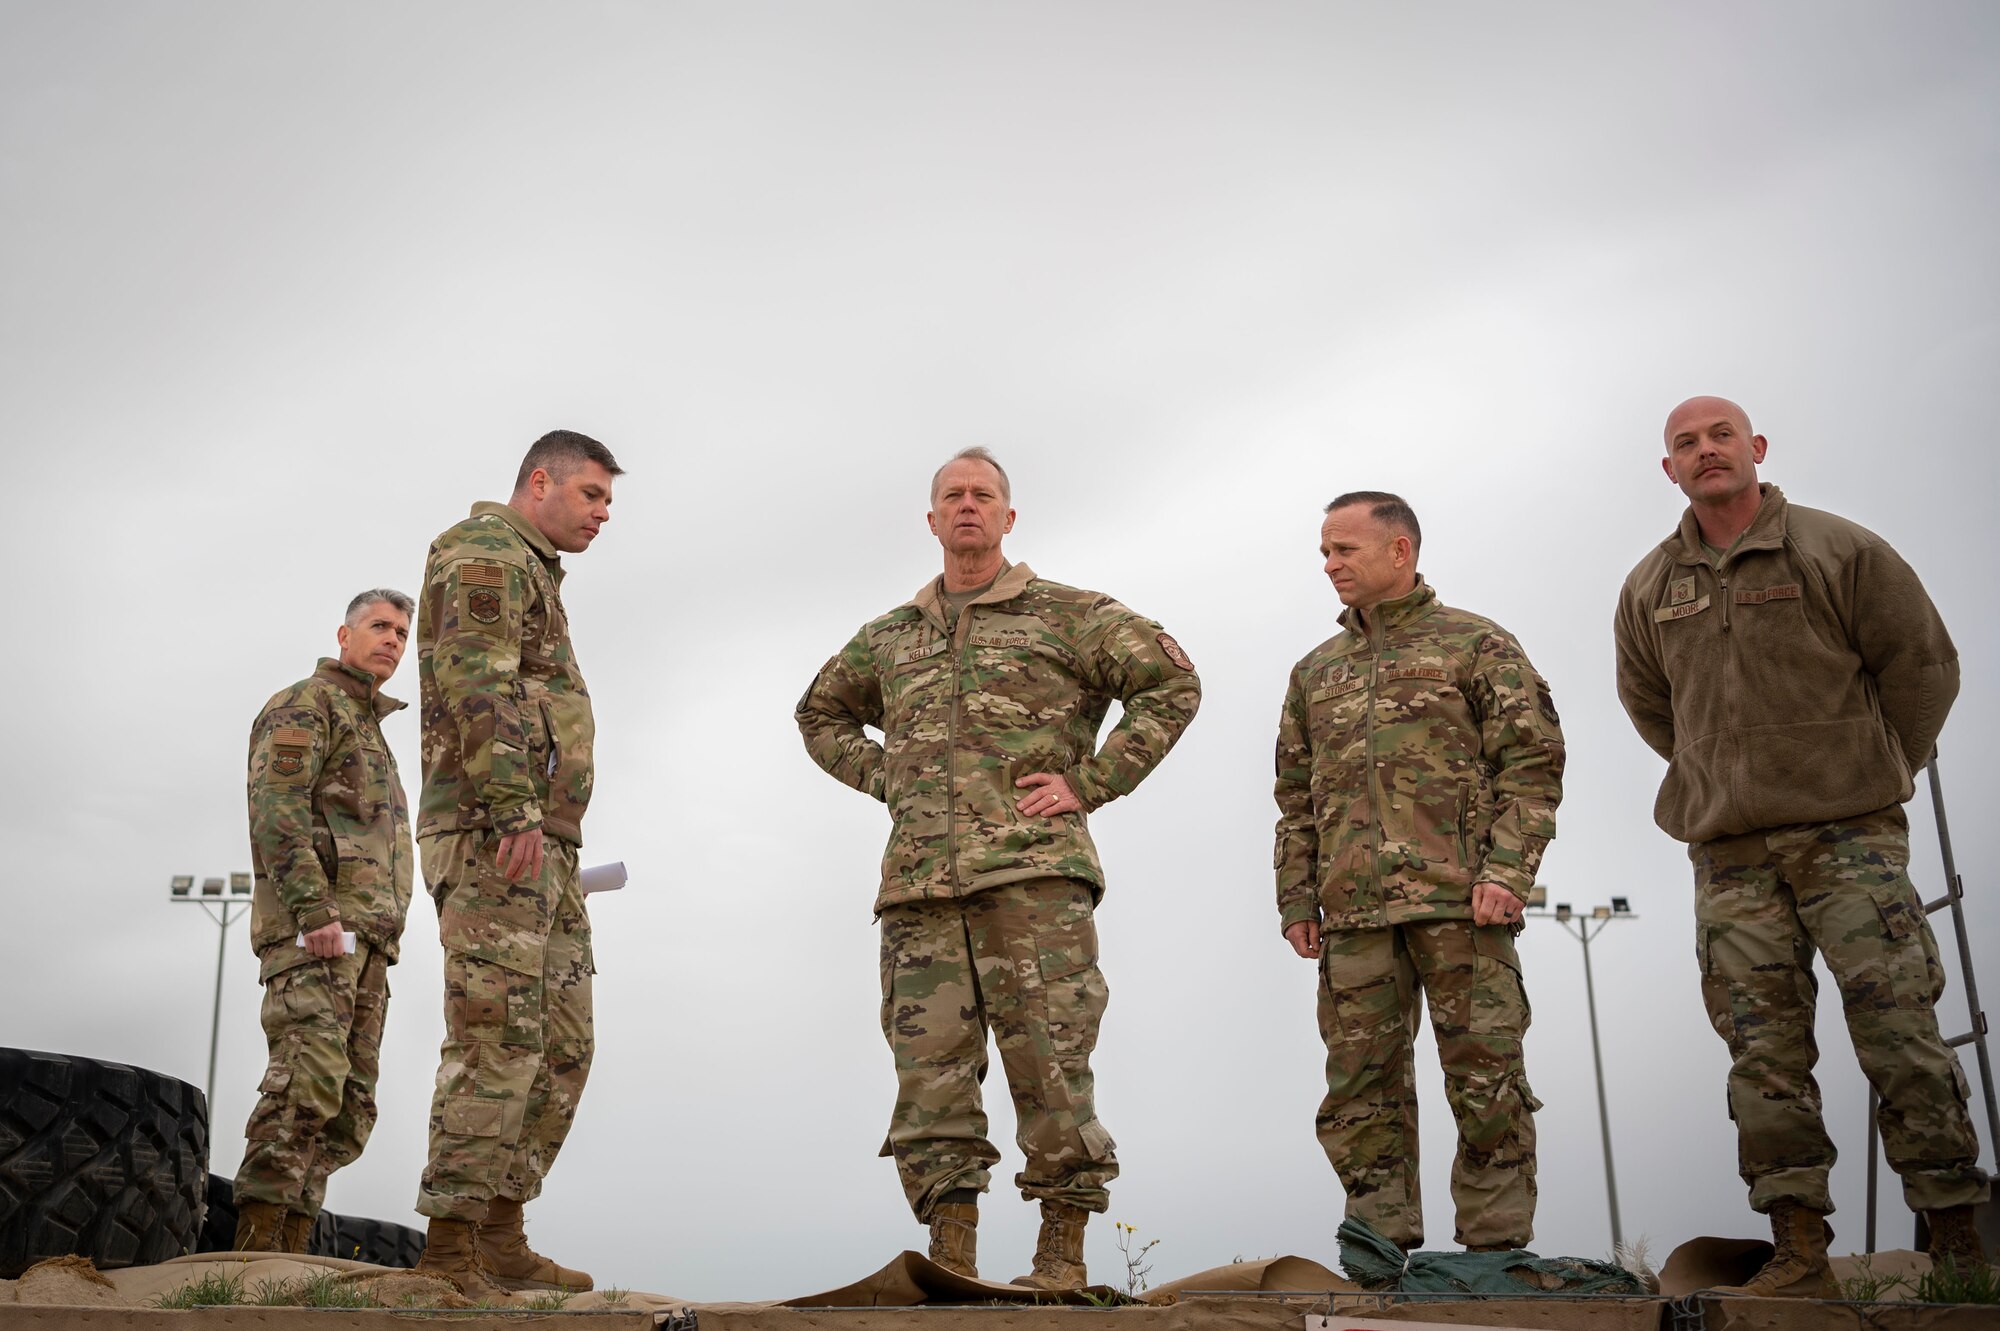 U.S. Air Force Gen. Mark Kelly, commander of Air Combat Command and Command Chief Master Sgt. John Storms, ACC, along with Col. George Buch, left, 386th Air Expeditionary Wing commander, and 386th Expeditionary Logistics Readiness Squadron leadership, look out over the fuel farm during a tour at Ali Al Salem Air Base, Kuwait, Feb. 15, 2023.